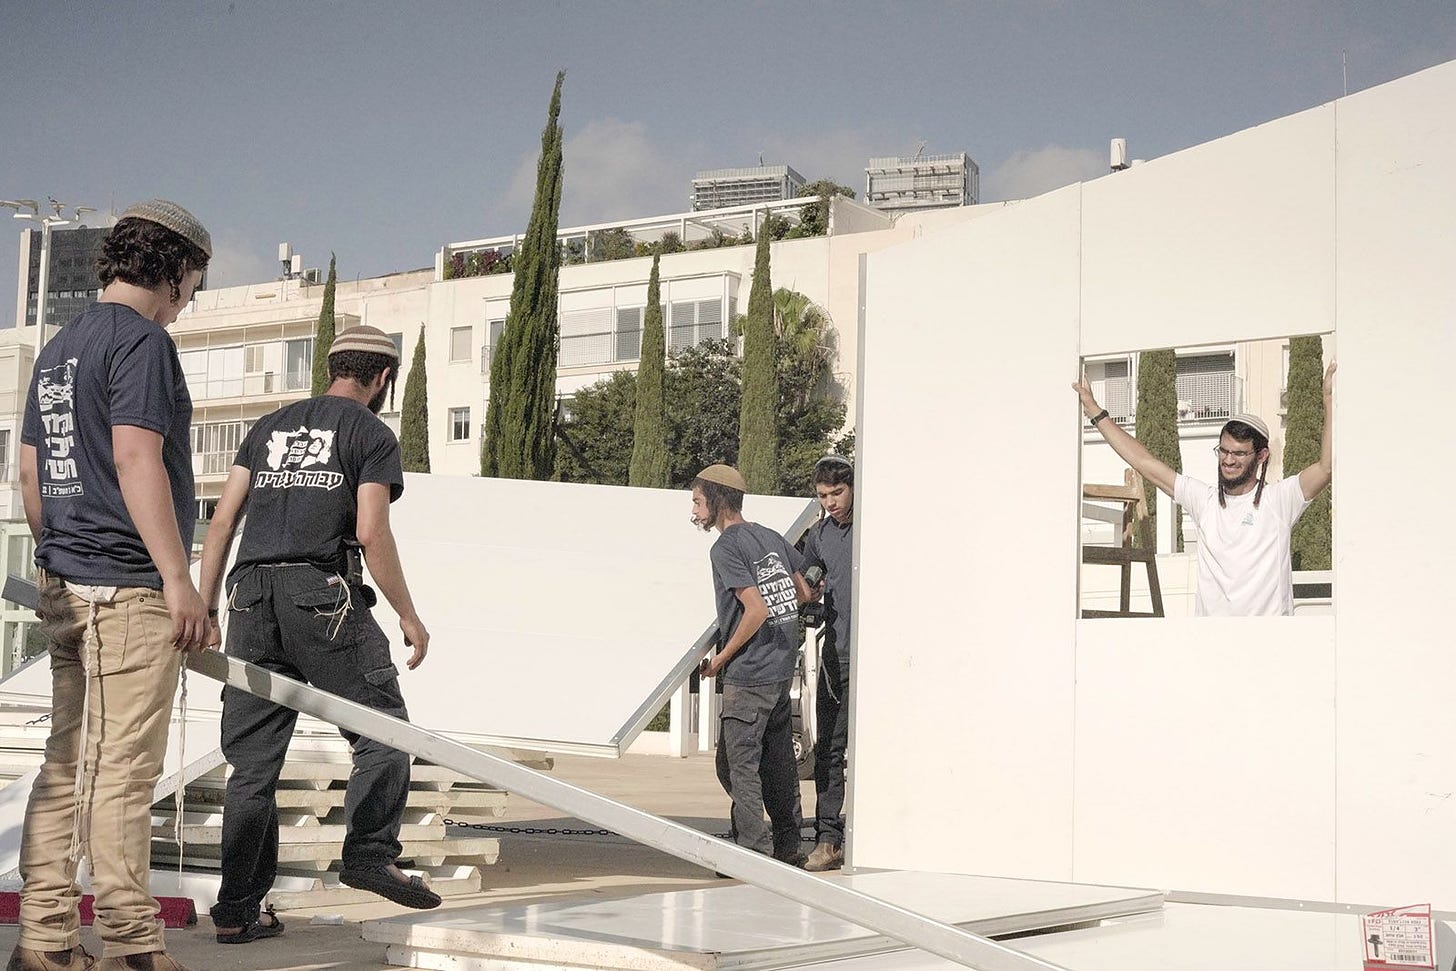 Settler activists constructing a pre-fabricated home for a rally in Habima Square, Tel Aviv, on July 16, 2022. (Photo by Natan Odenheimer)